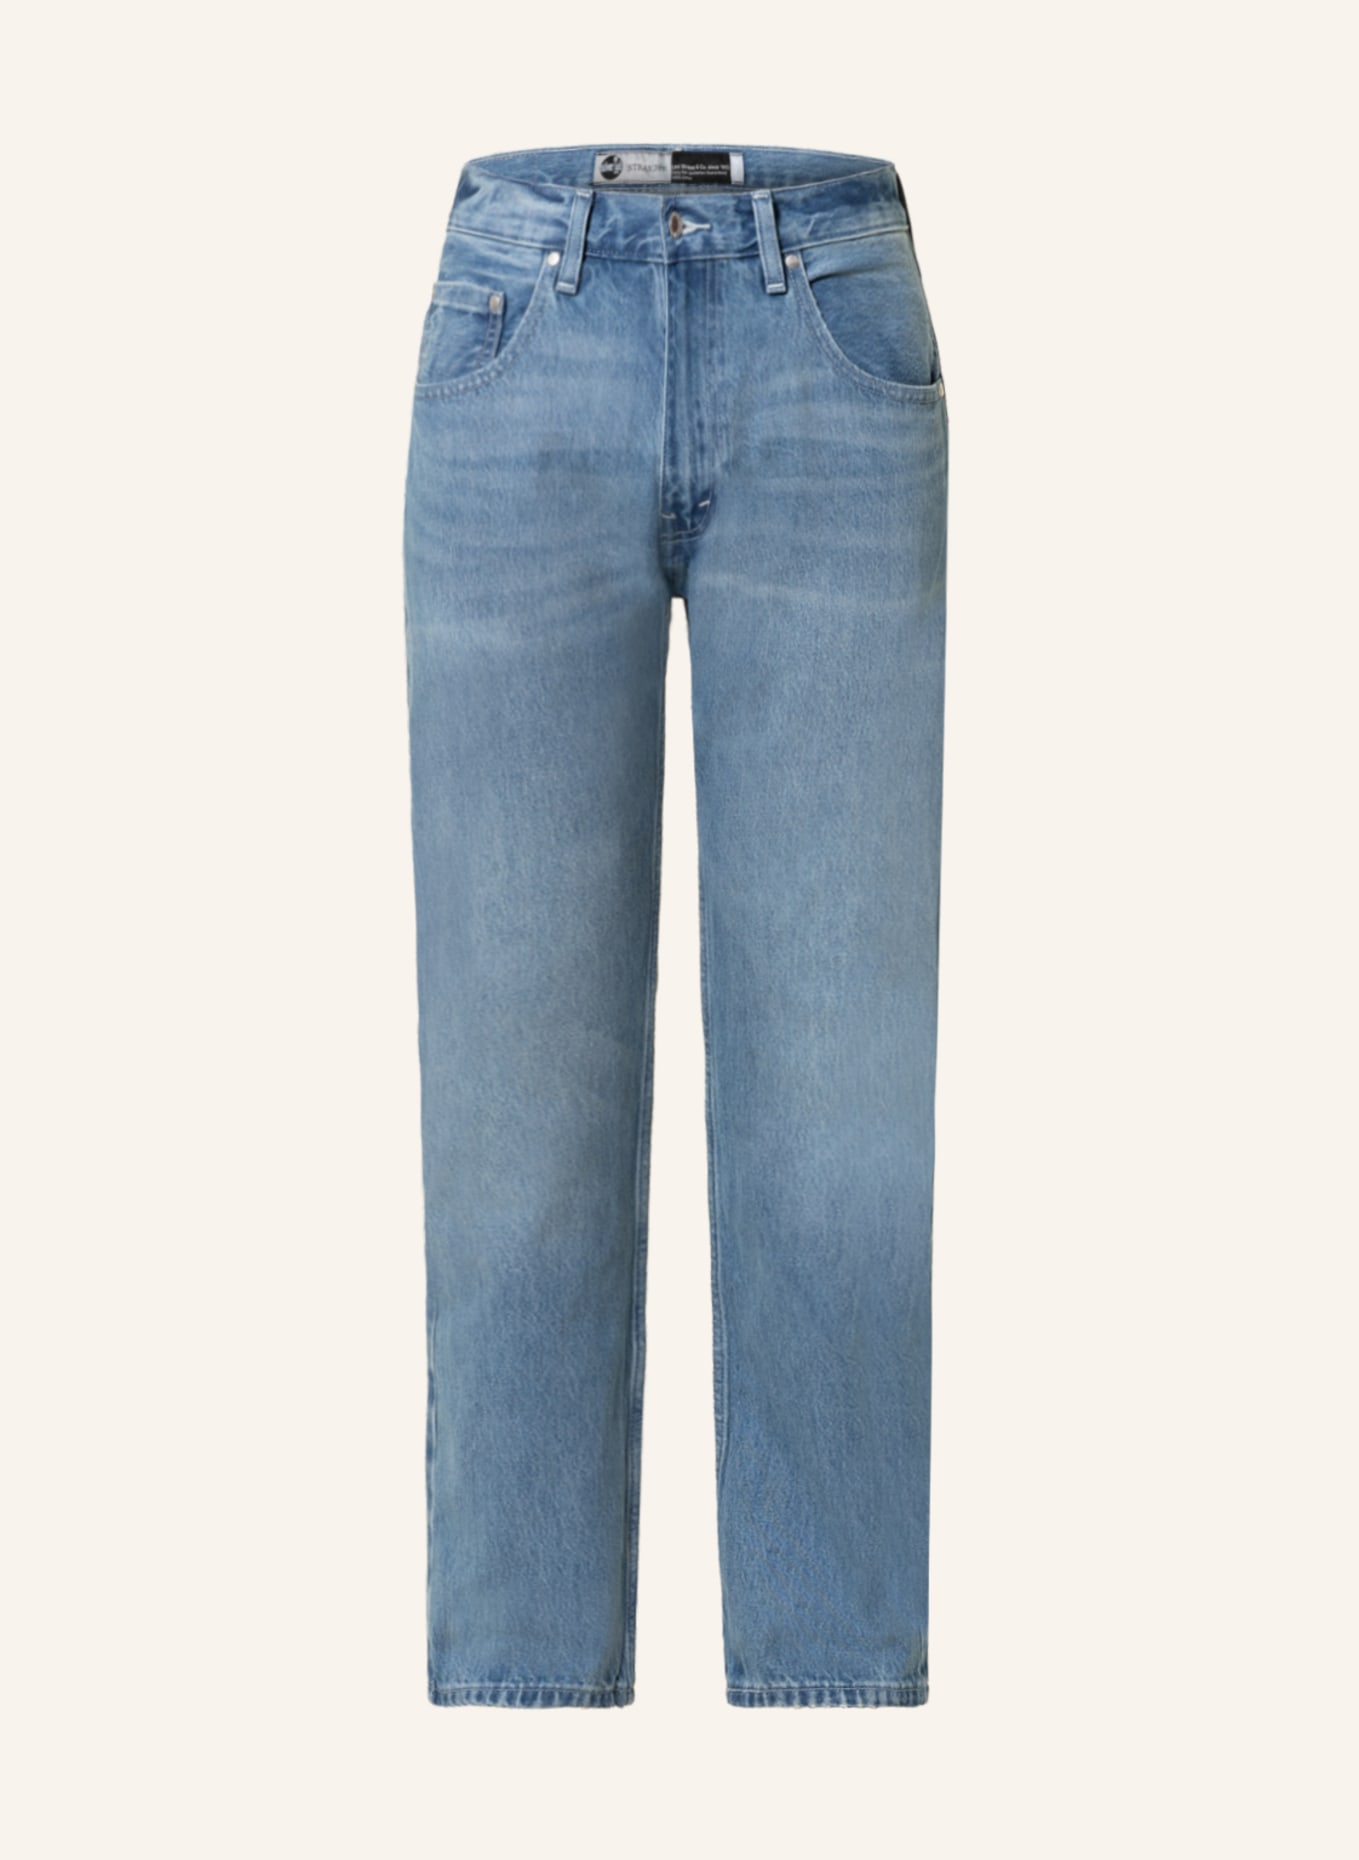 Levi's® Jeans SILVERTAB® straight fit, Color: 00 Med Indigo - Worn In (Image 1)